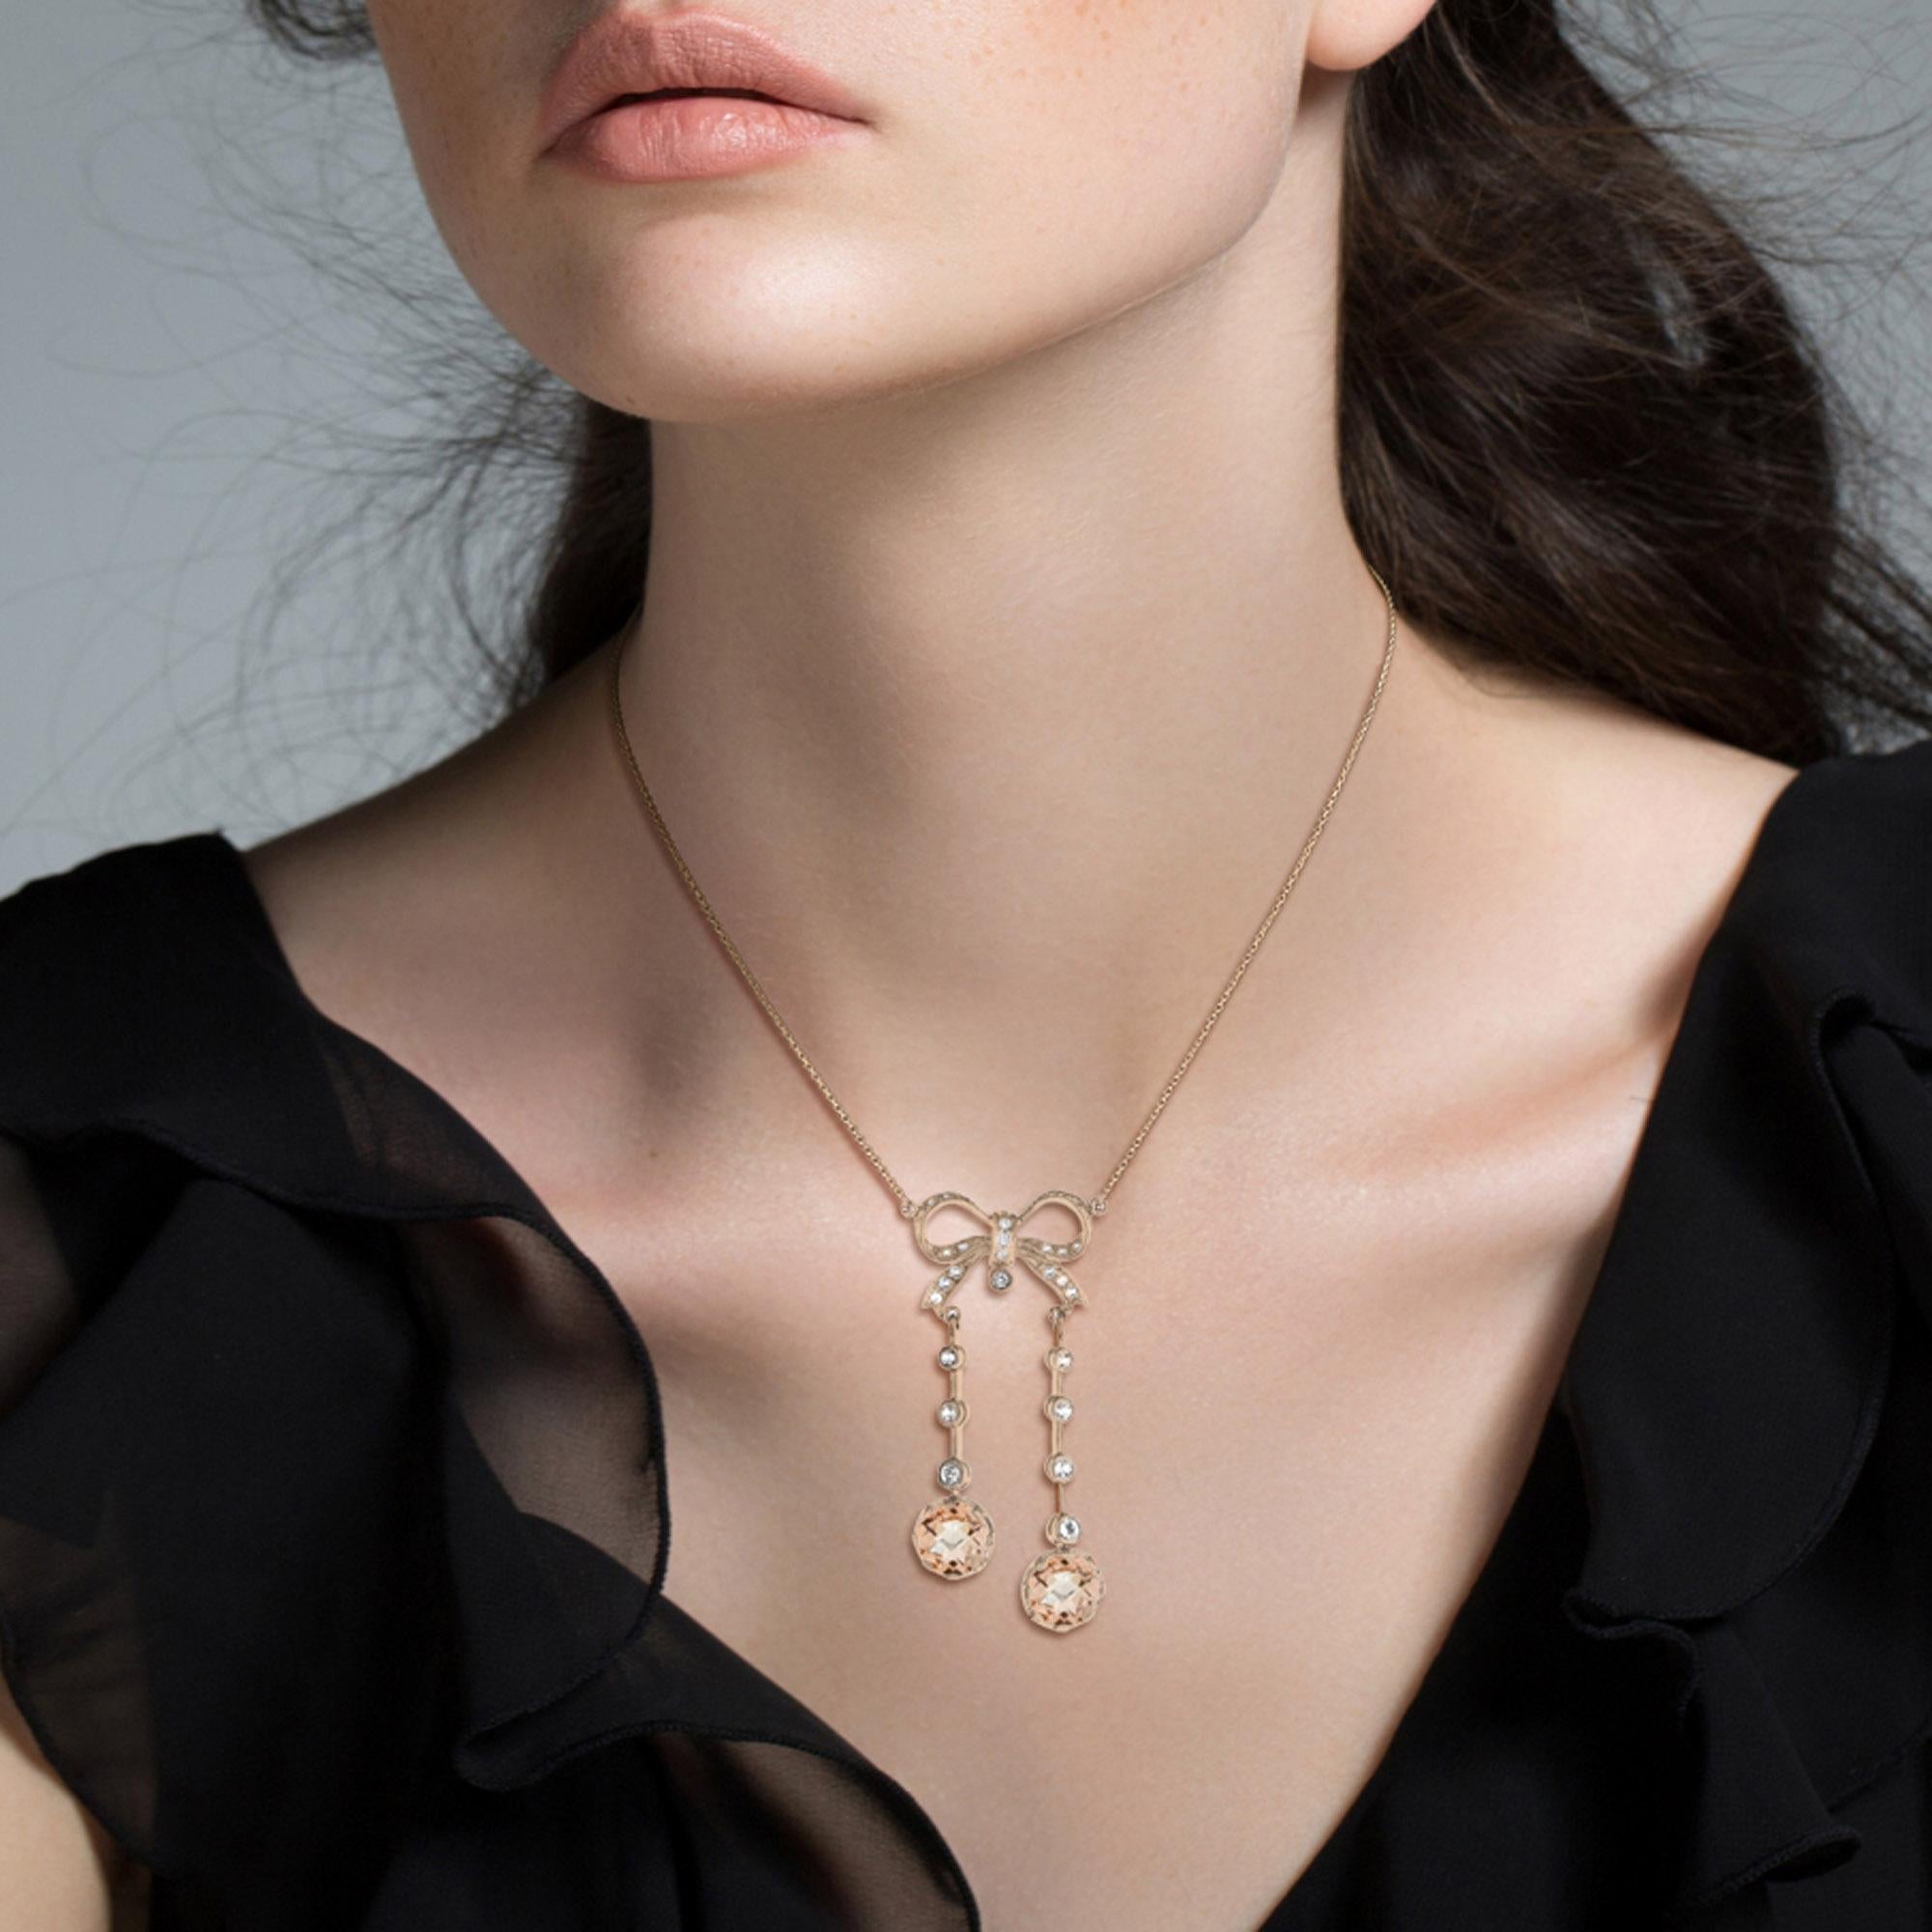 A 14k rose gold Edwardian style necklace comprised of two morganite and diamond drops, suspended below a bead-set diamond ribbon bow. The necklace is a wonderful example of Edwardian era jewelry and would make an ideal gift to the bride or someone